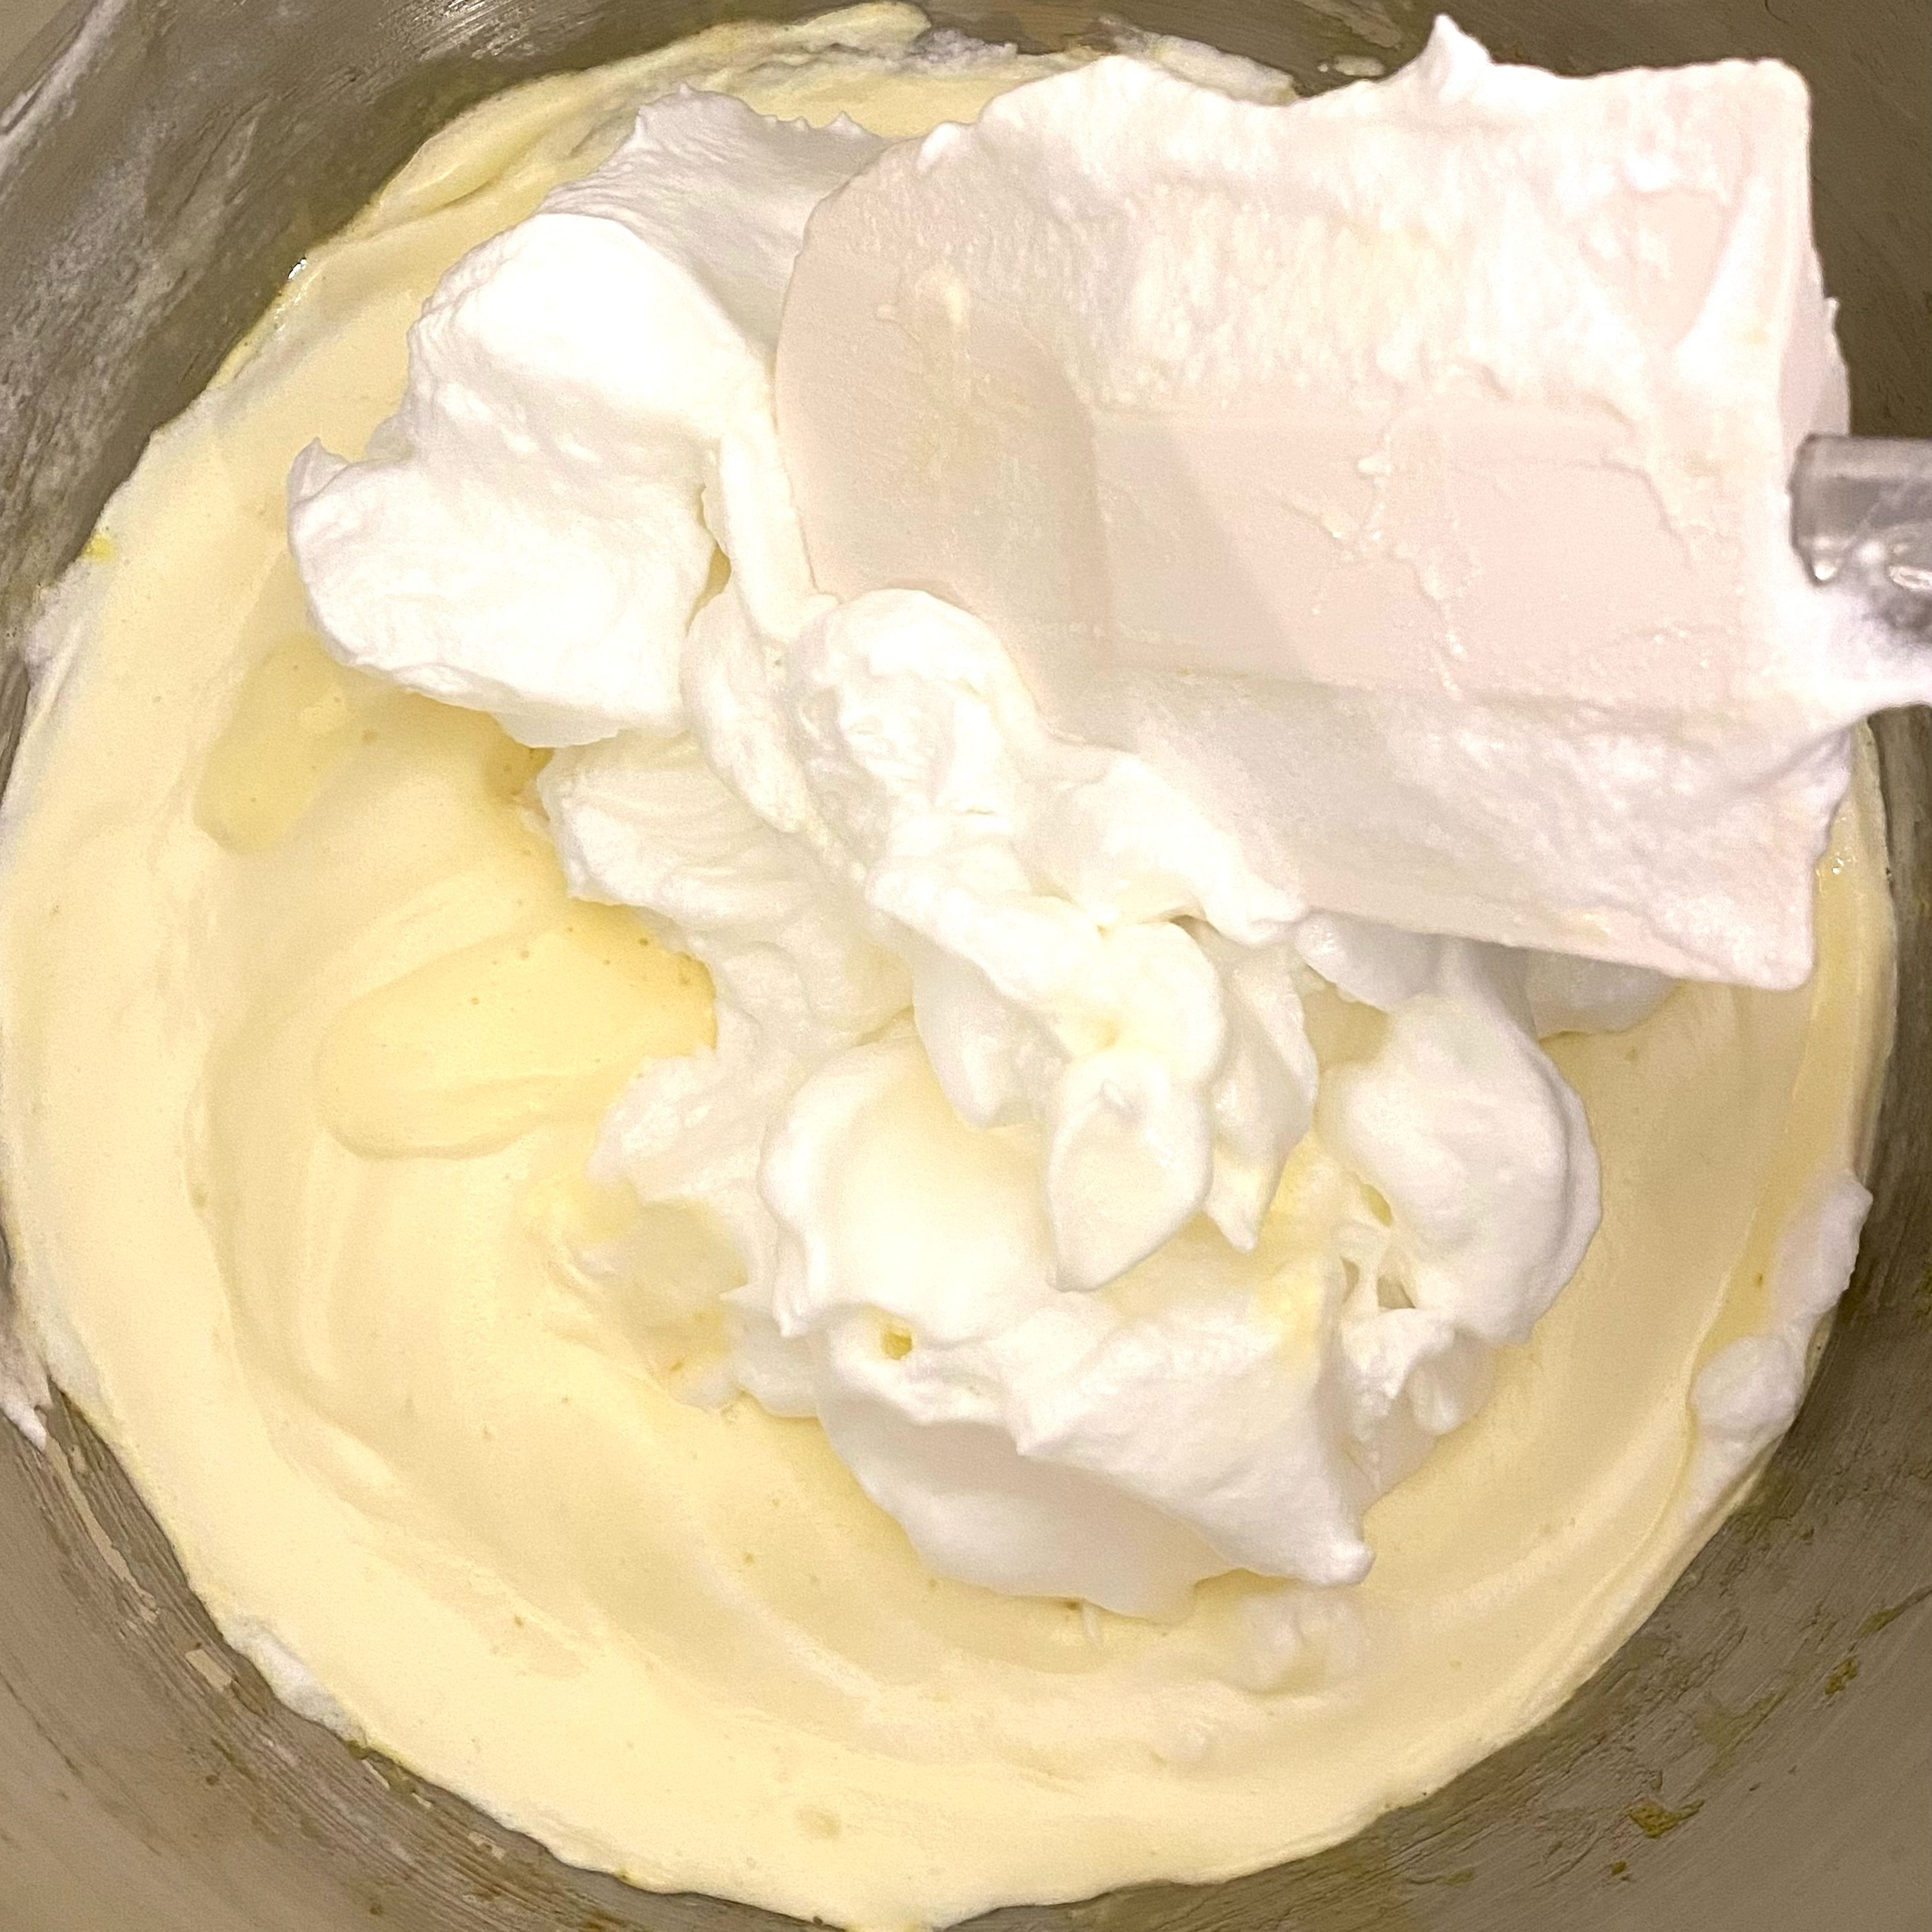 While the stand mixer is running, prepare the meringue: Add egg whites into a separate mixing bowl. Using a hand mixer (unless you have another stand mixer), Let it whisk until the meringue reaches stiff peak, gradually adding the remaining half (about 100gram) of the sugar. Add half of the finished meringue into the ribbon staged yolk mixture, folding gently. Fold the remaining meringue into the lightened yolk mixture very carefully, try your best not to deflate the batter. 
